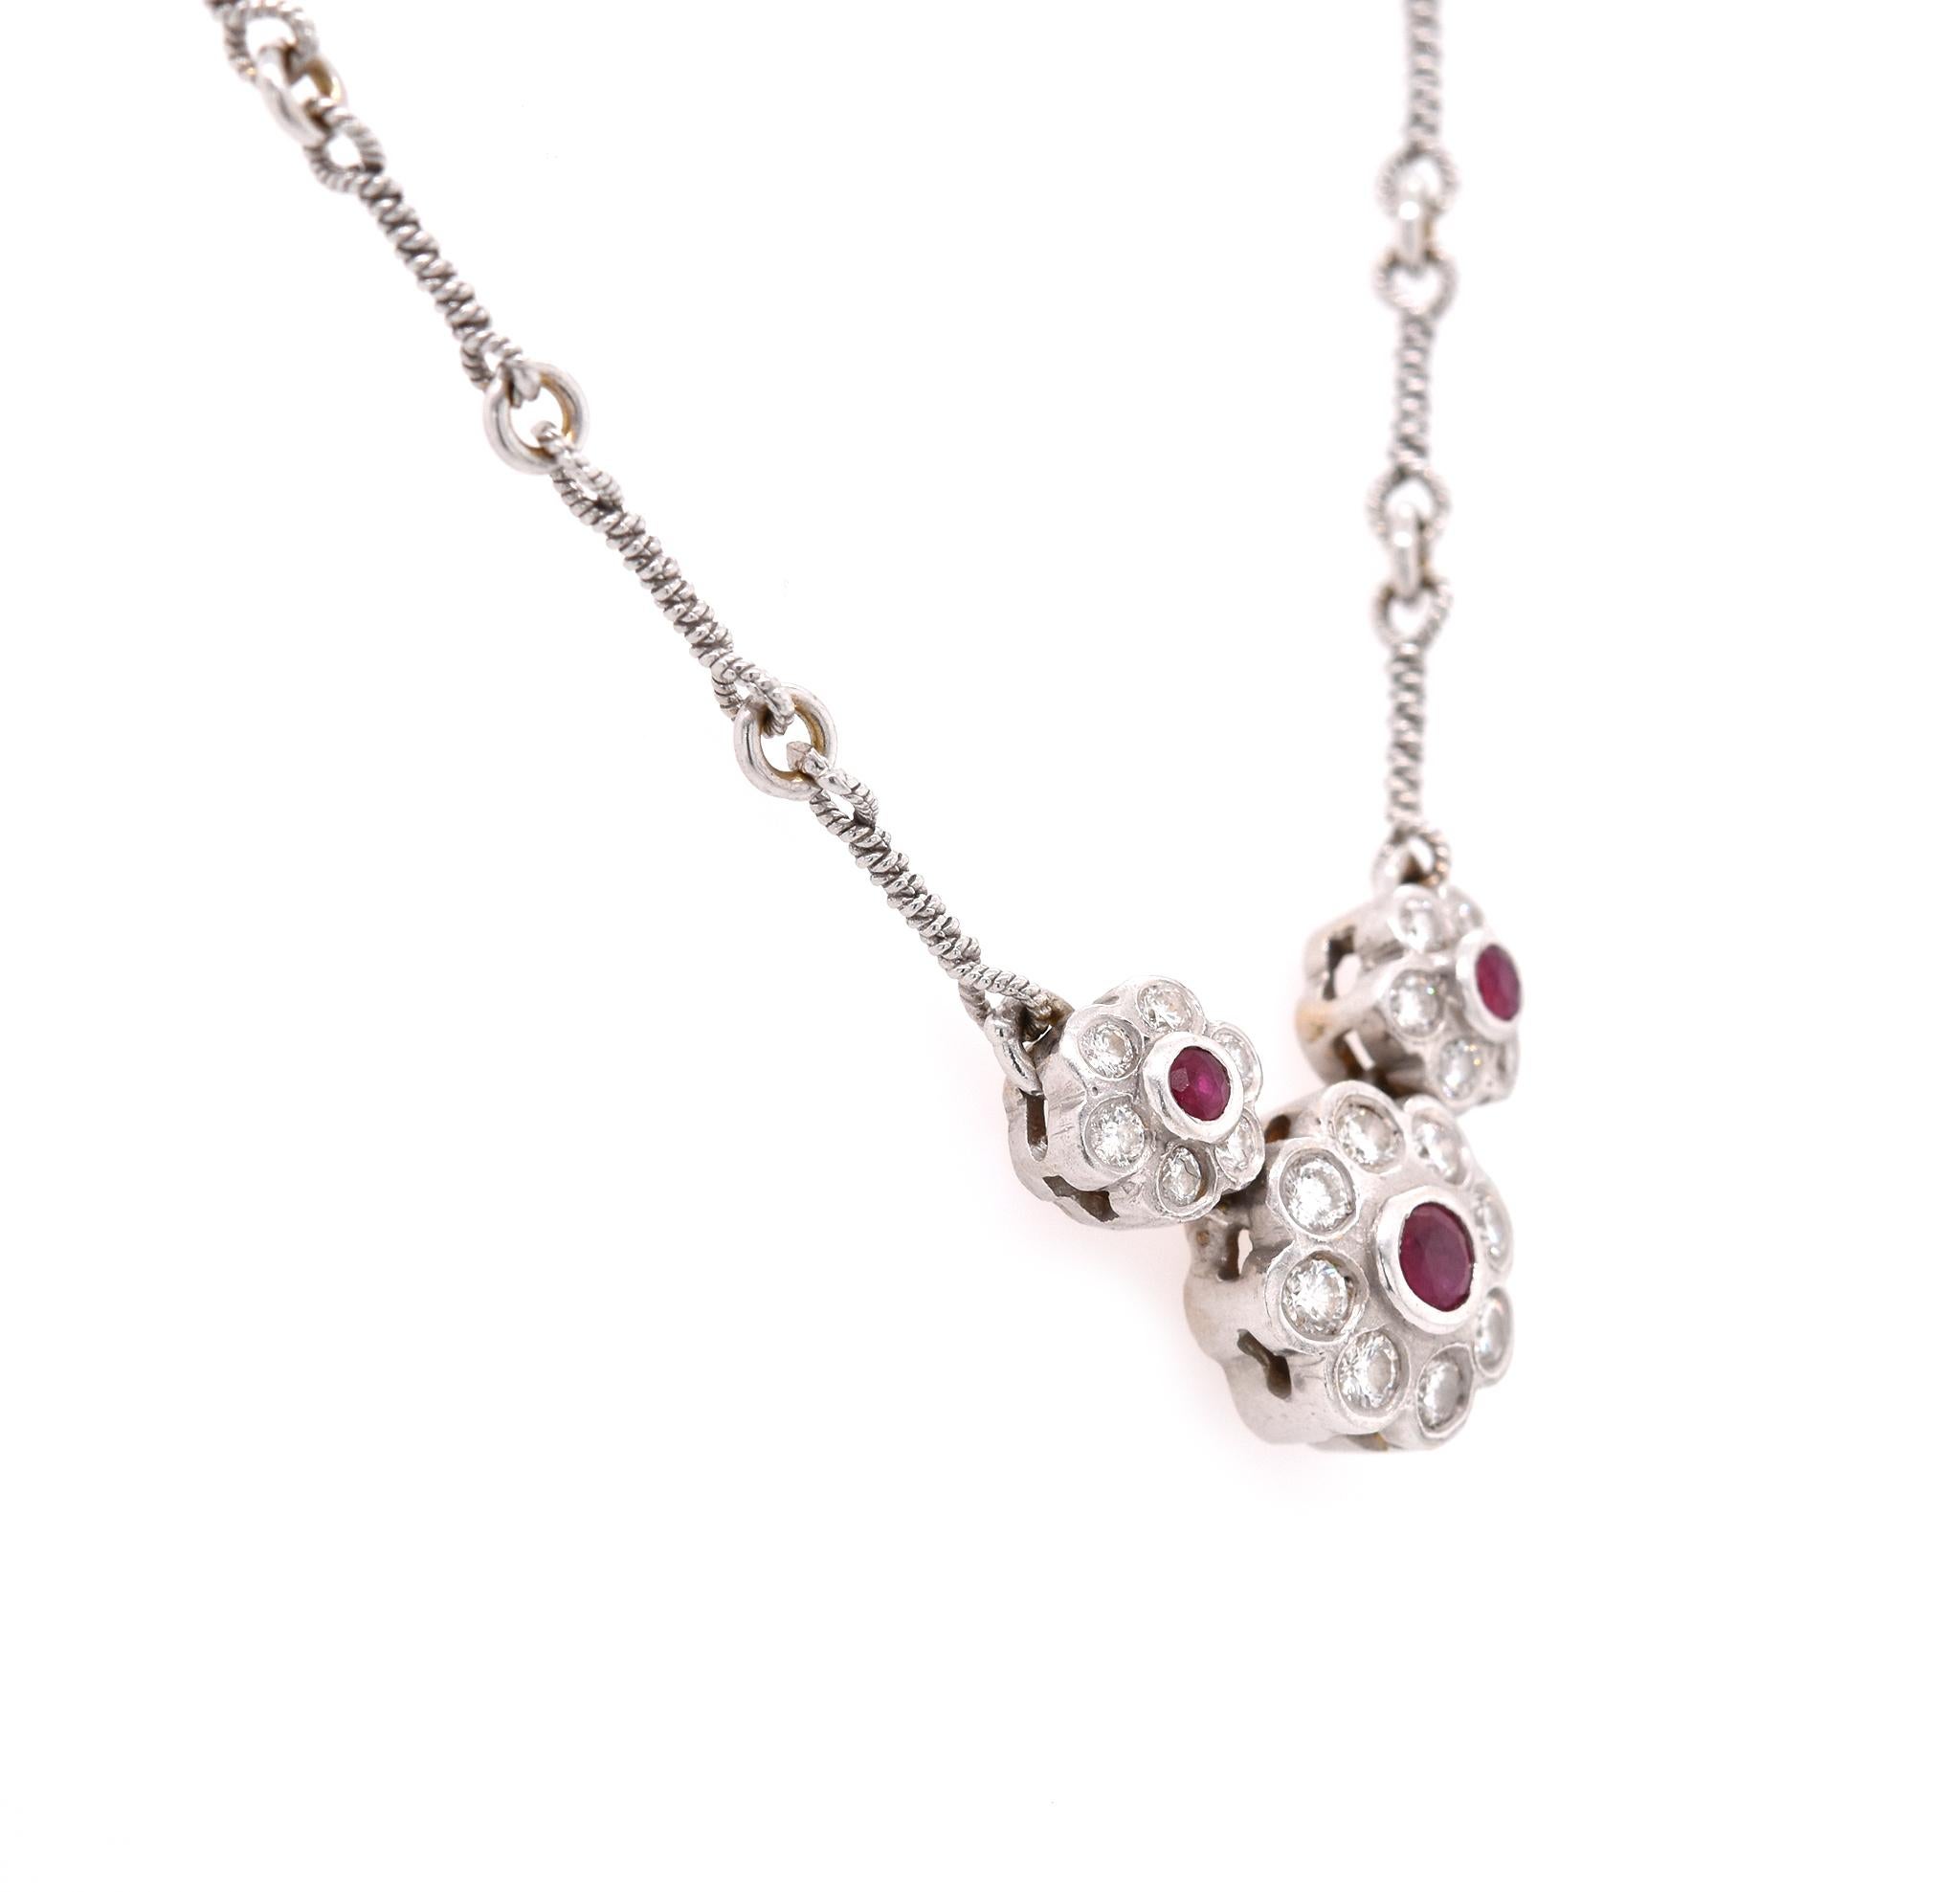 Designer: custom design
Material: 18k white gold
Gemstone: 3 round cut rubies
Diamonds: 20 round brilliant cuts = 0.48cttw
Color: G
Clarity: VS
Dimensions: necklace measures 15-inches in length
Weight: 8.9 grams
